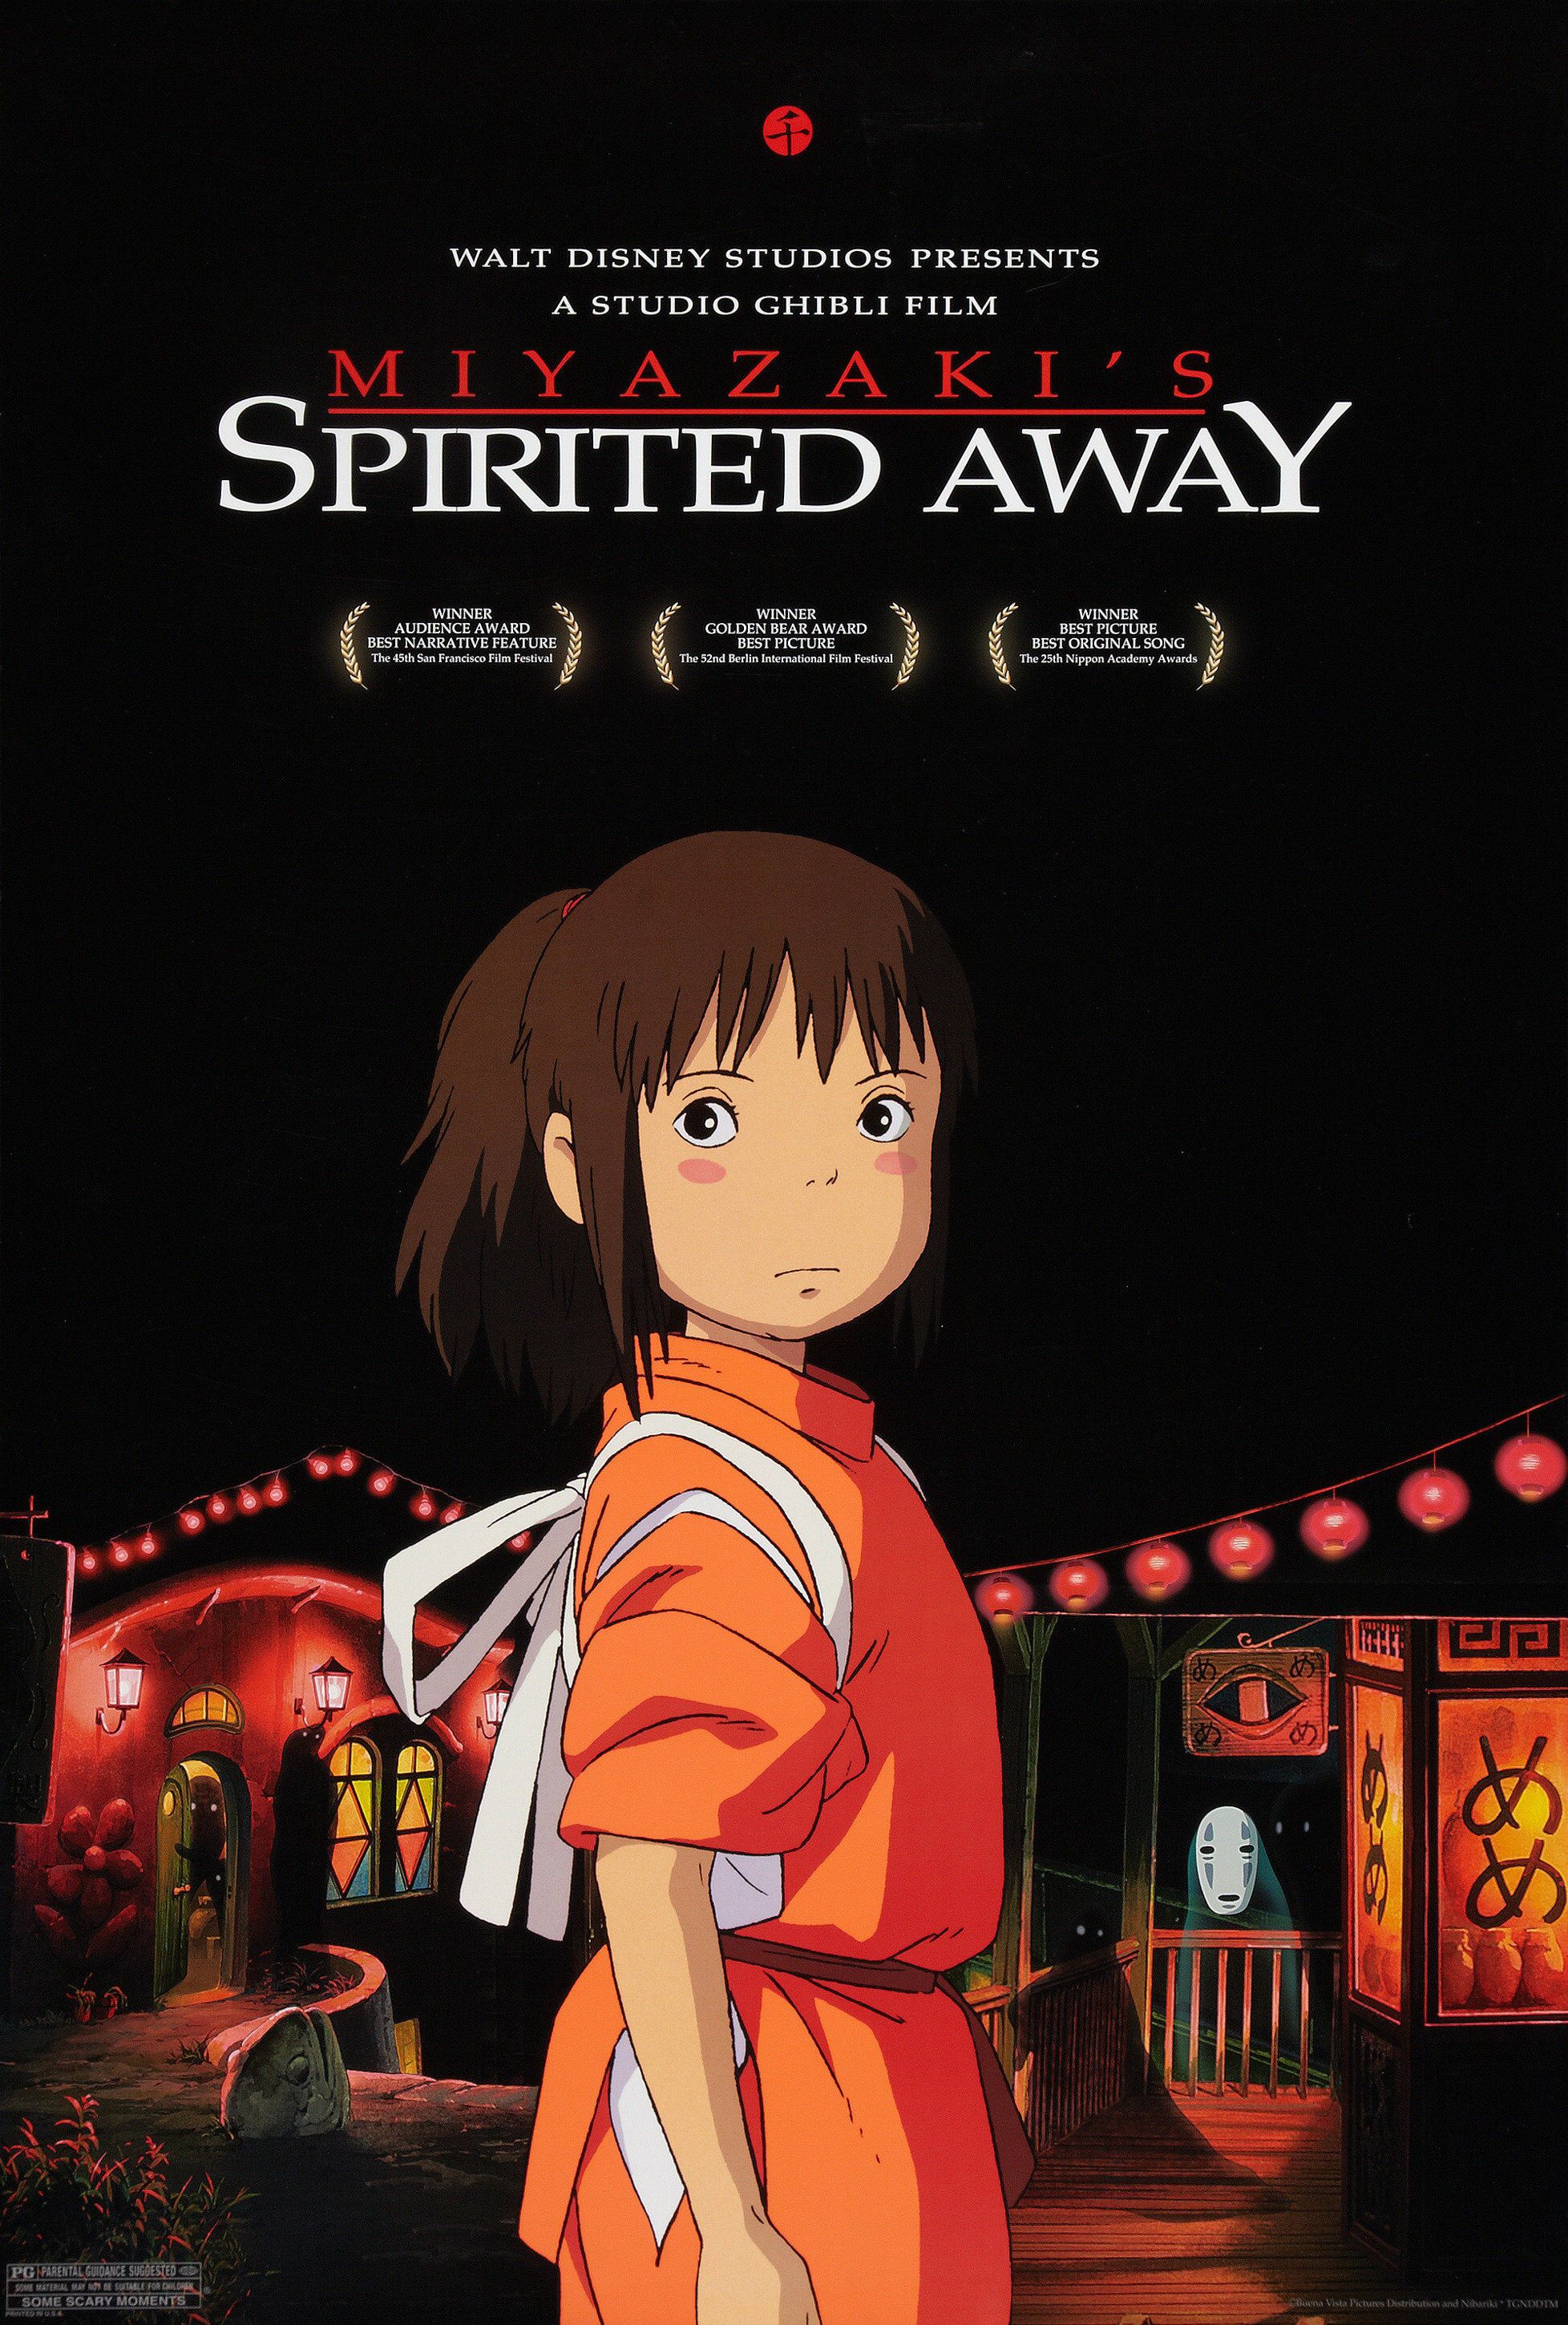 The cover art for the film "Spirited Away" displays the main character Chihiro in front of an animated rendition of traditional Japanese architecture.